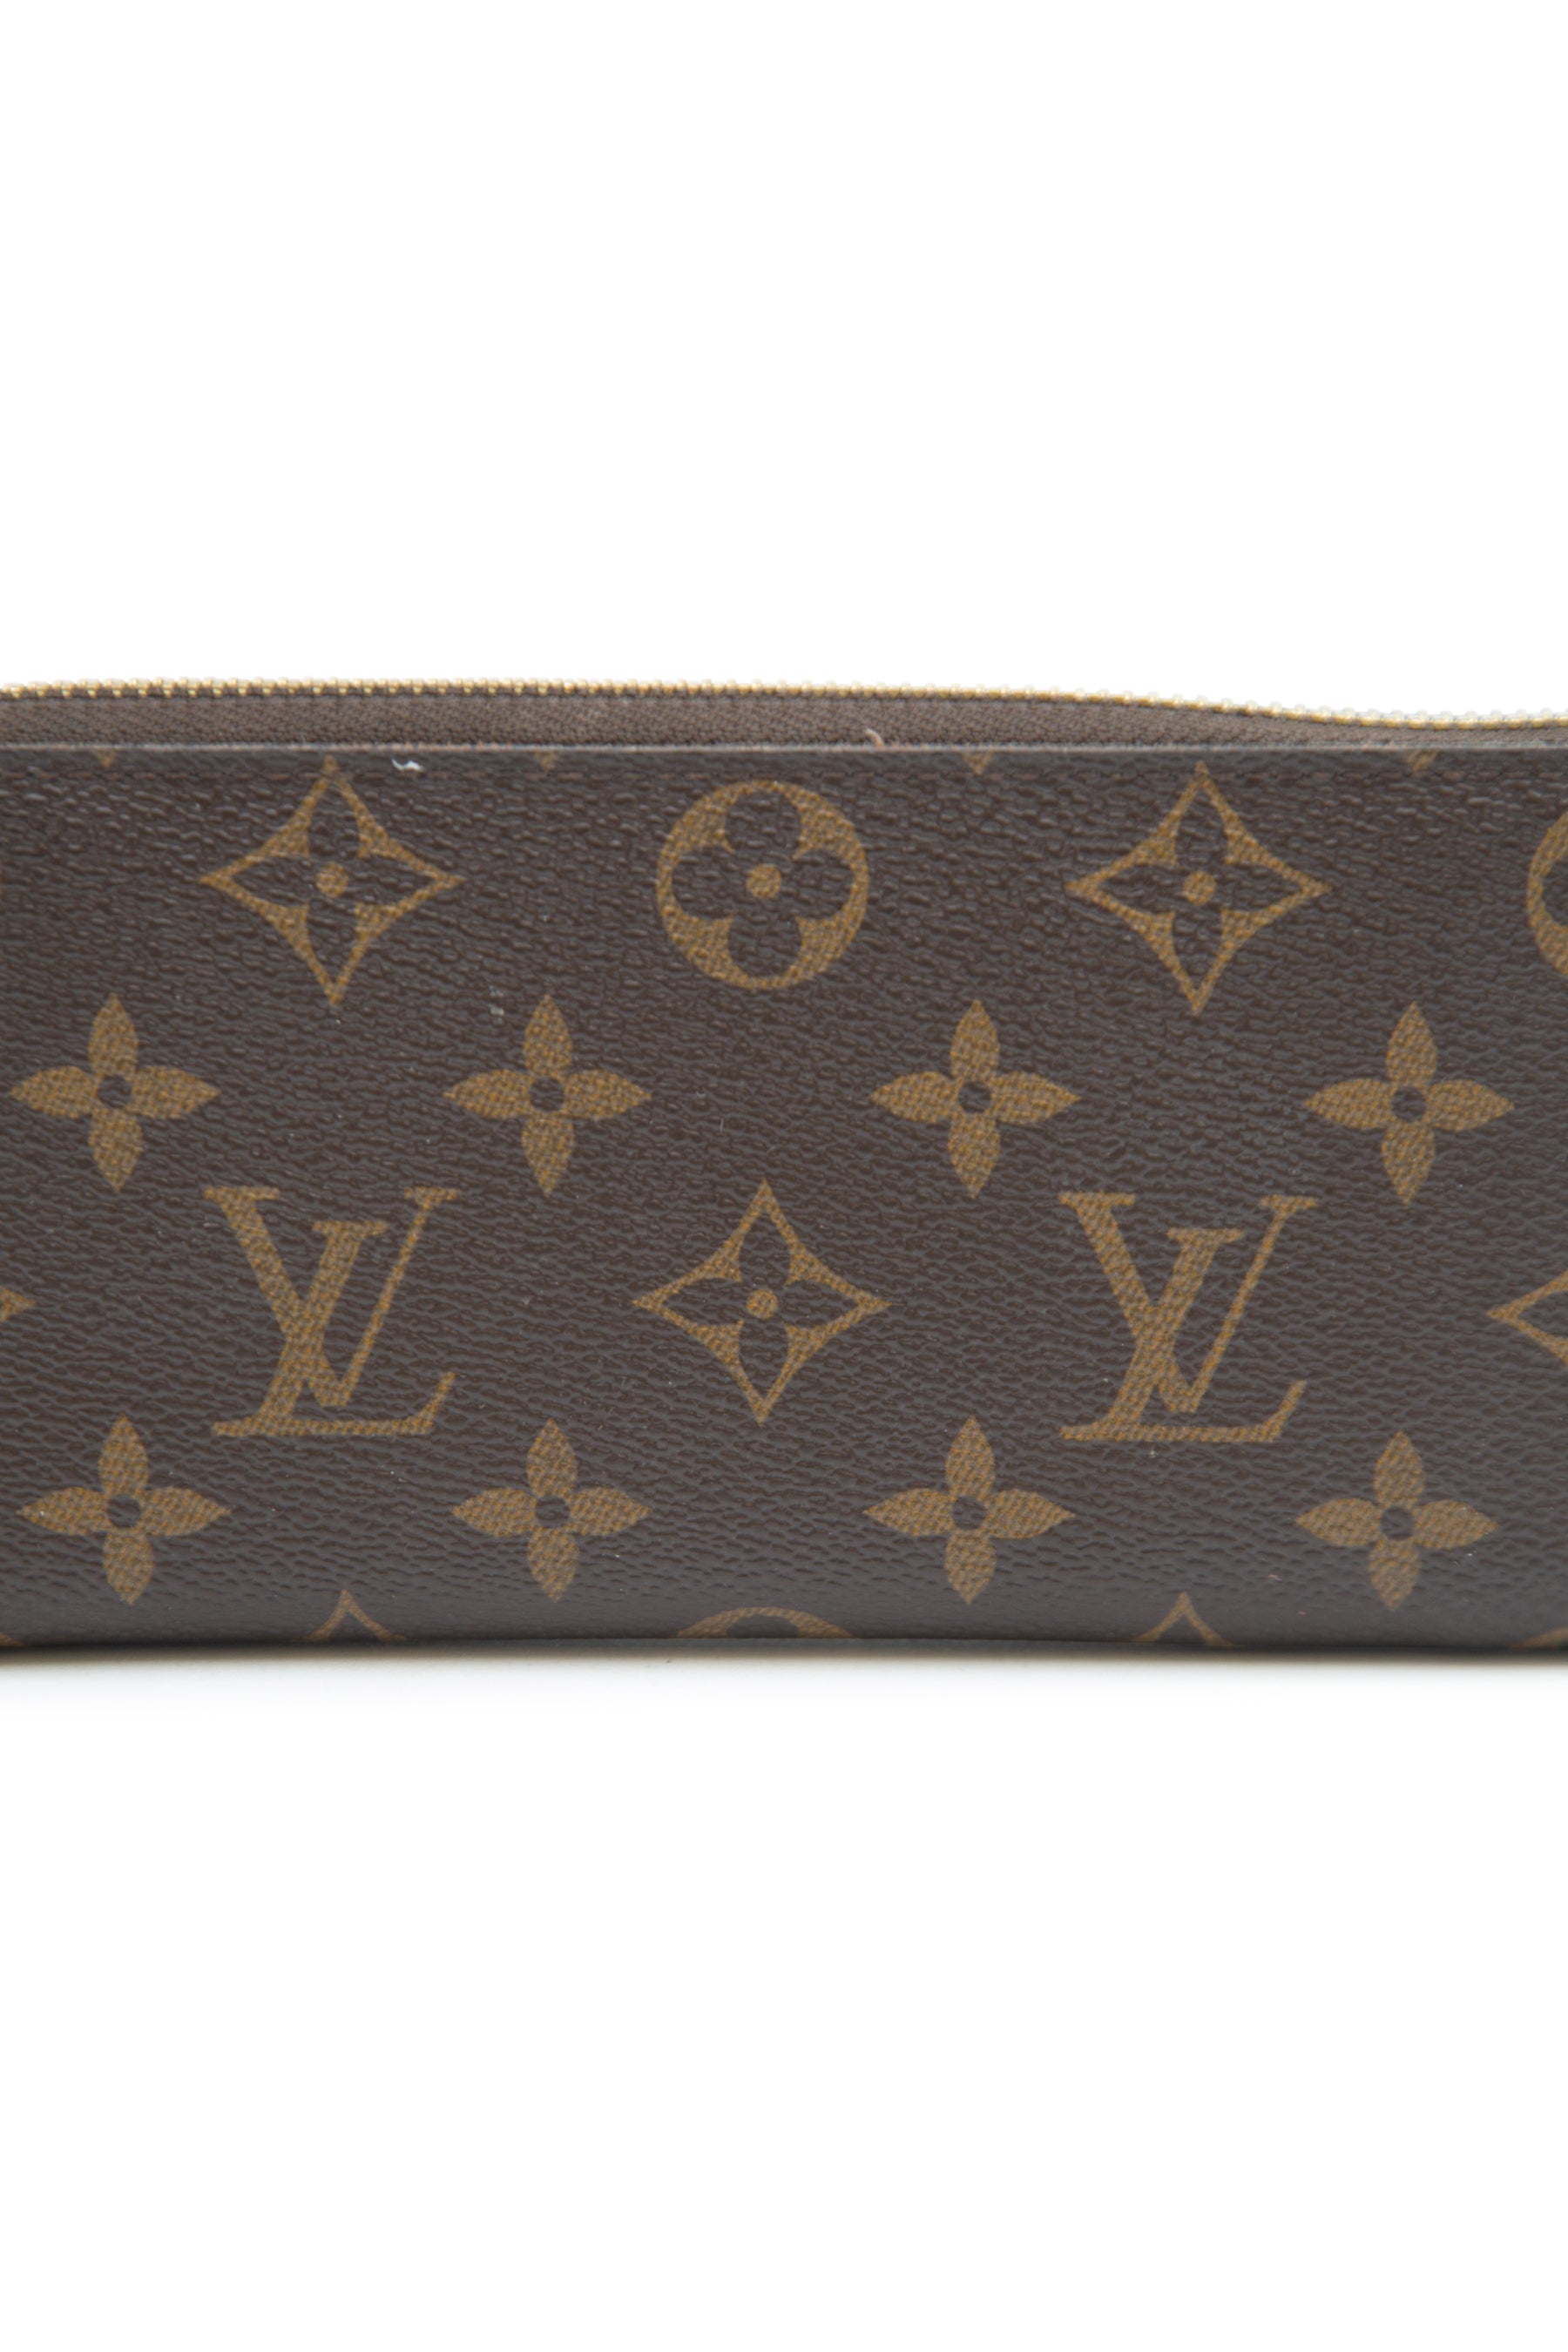 Pre-Owned Louis Vuitton Monogram Clemence Wallet